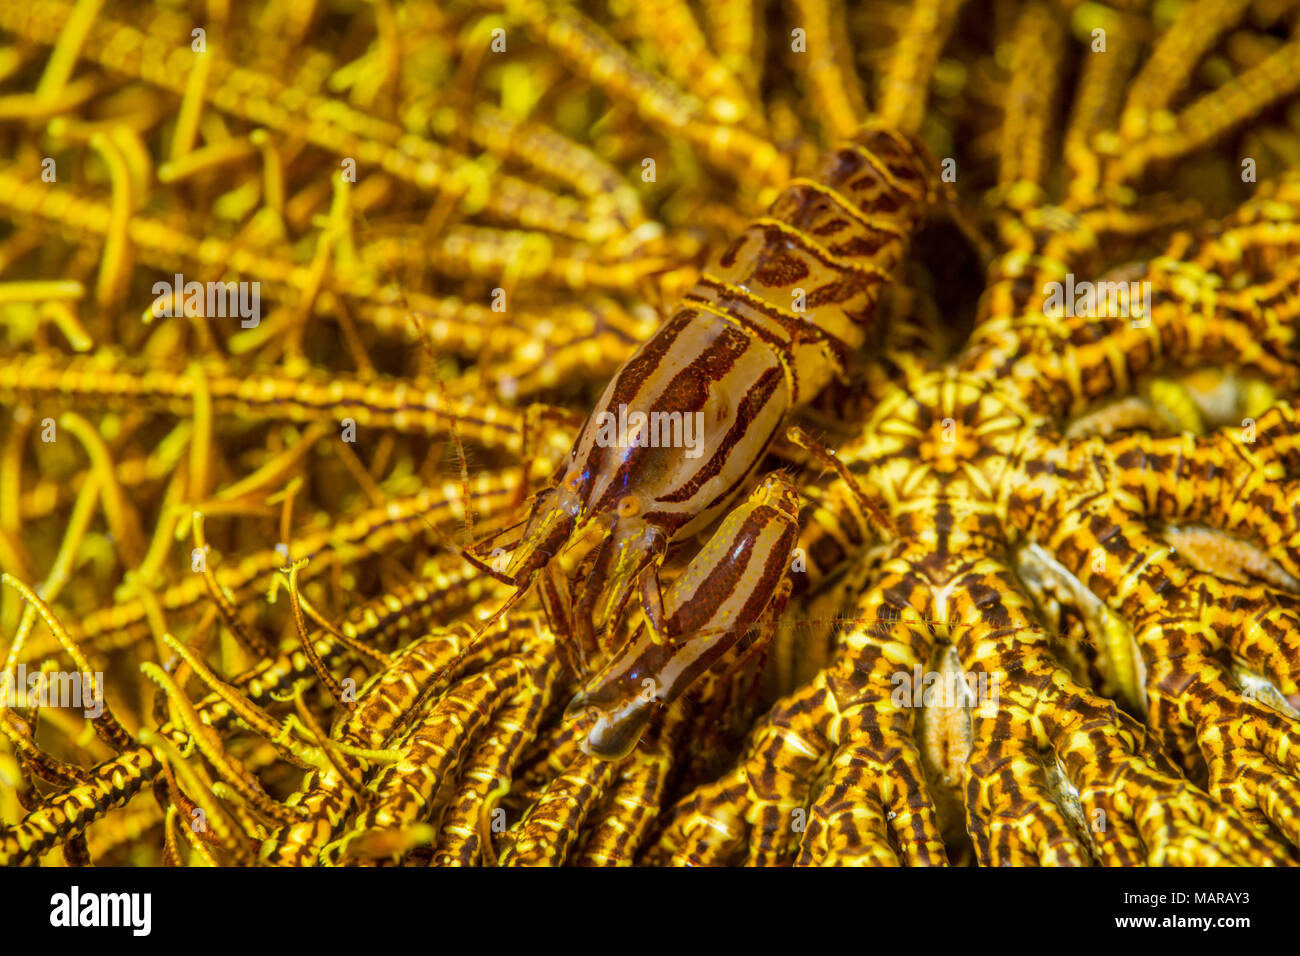 Snapping Prawn, Snapping Shrimp, Pistol Shrimp (Synalpheus stimpsoni) in the centre of a Crionoid.. Stock Photo